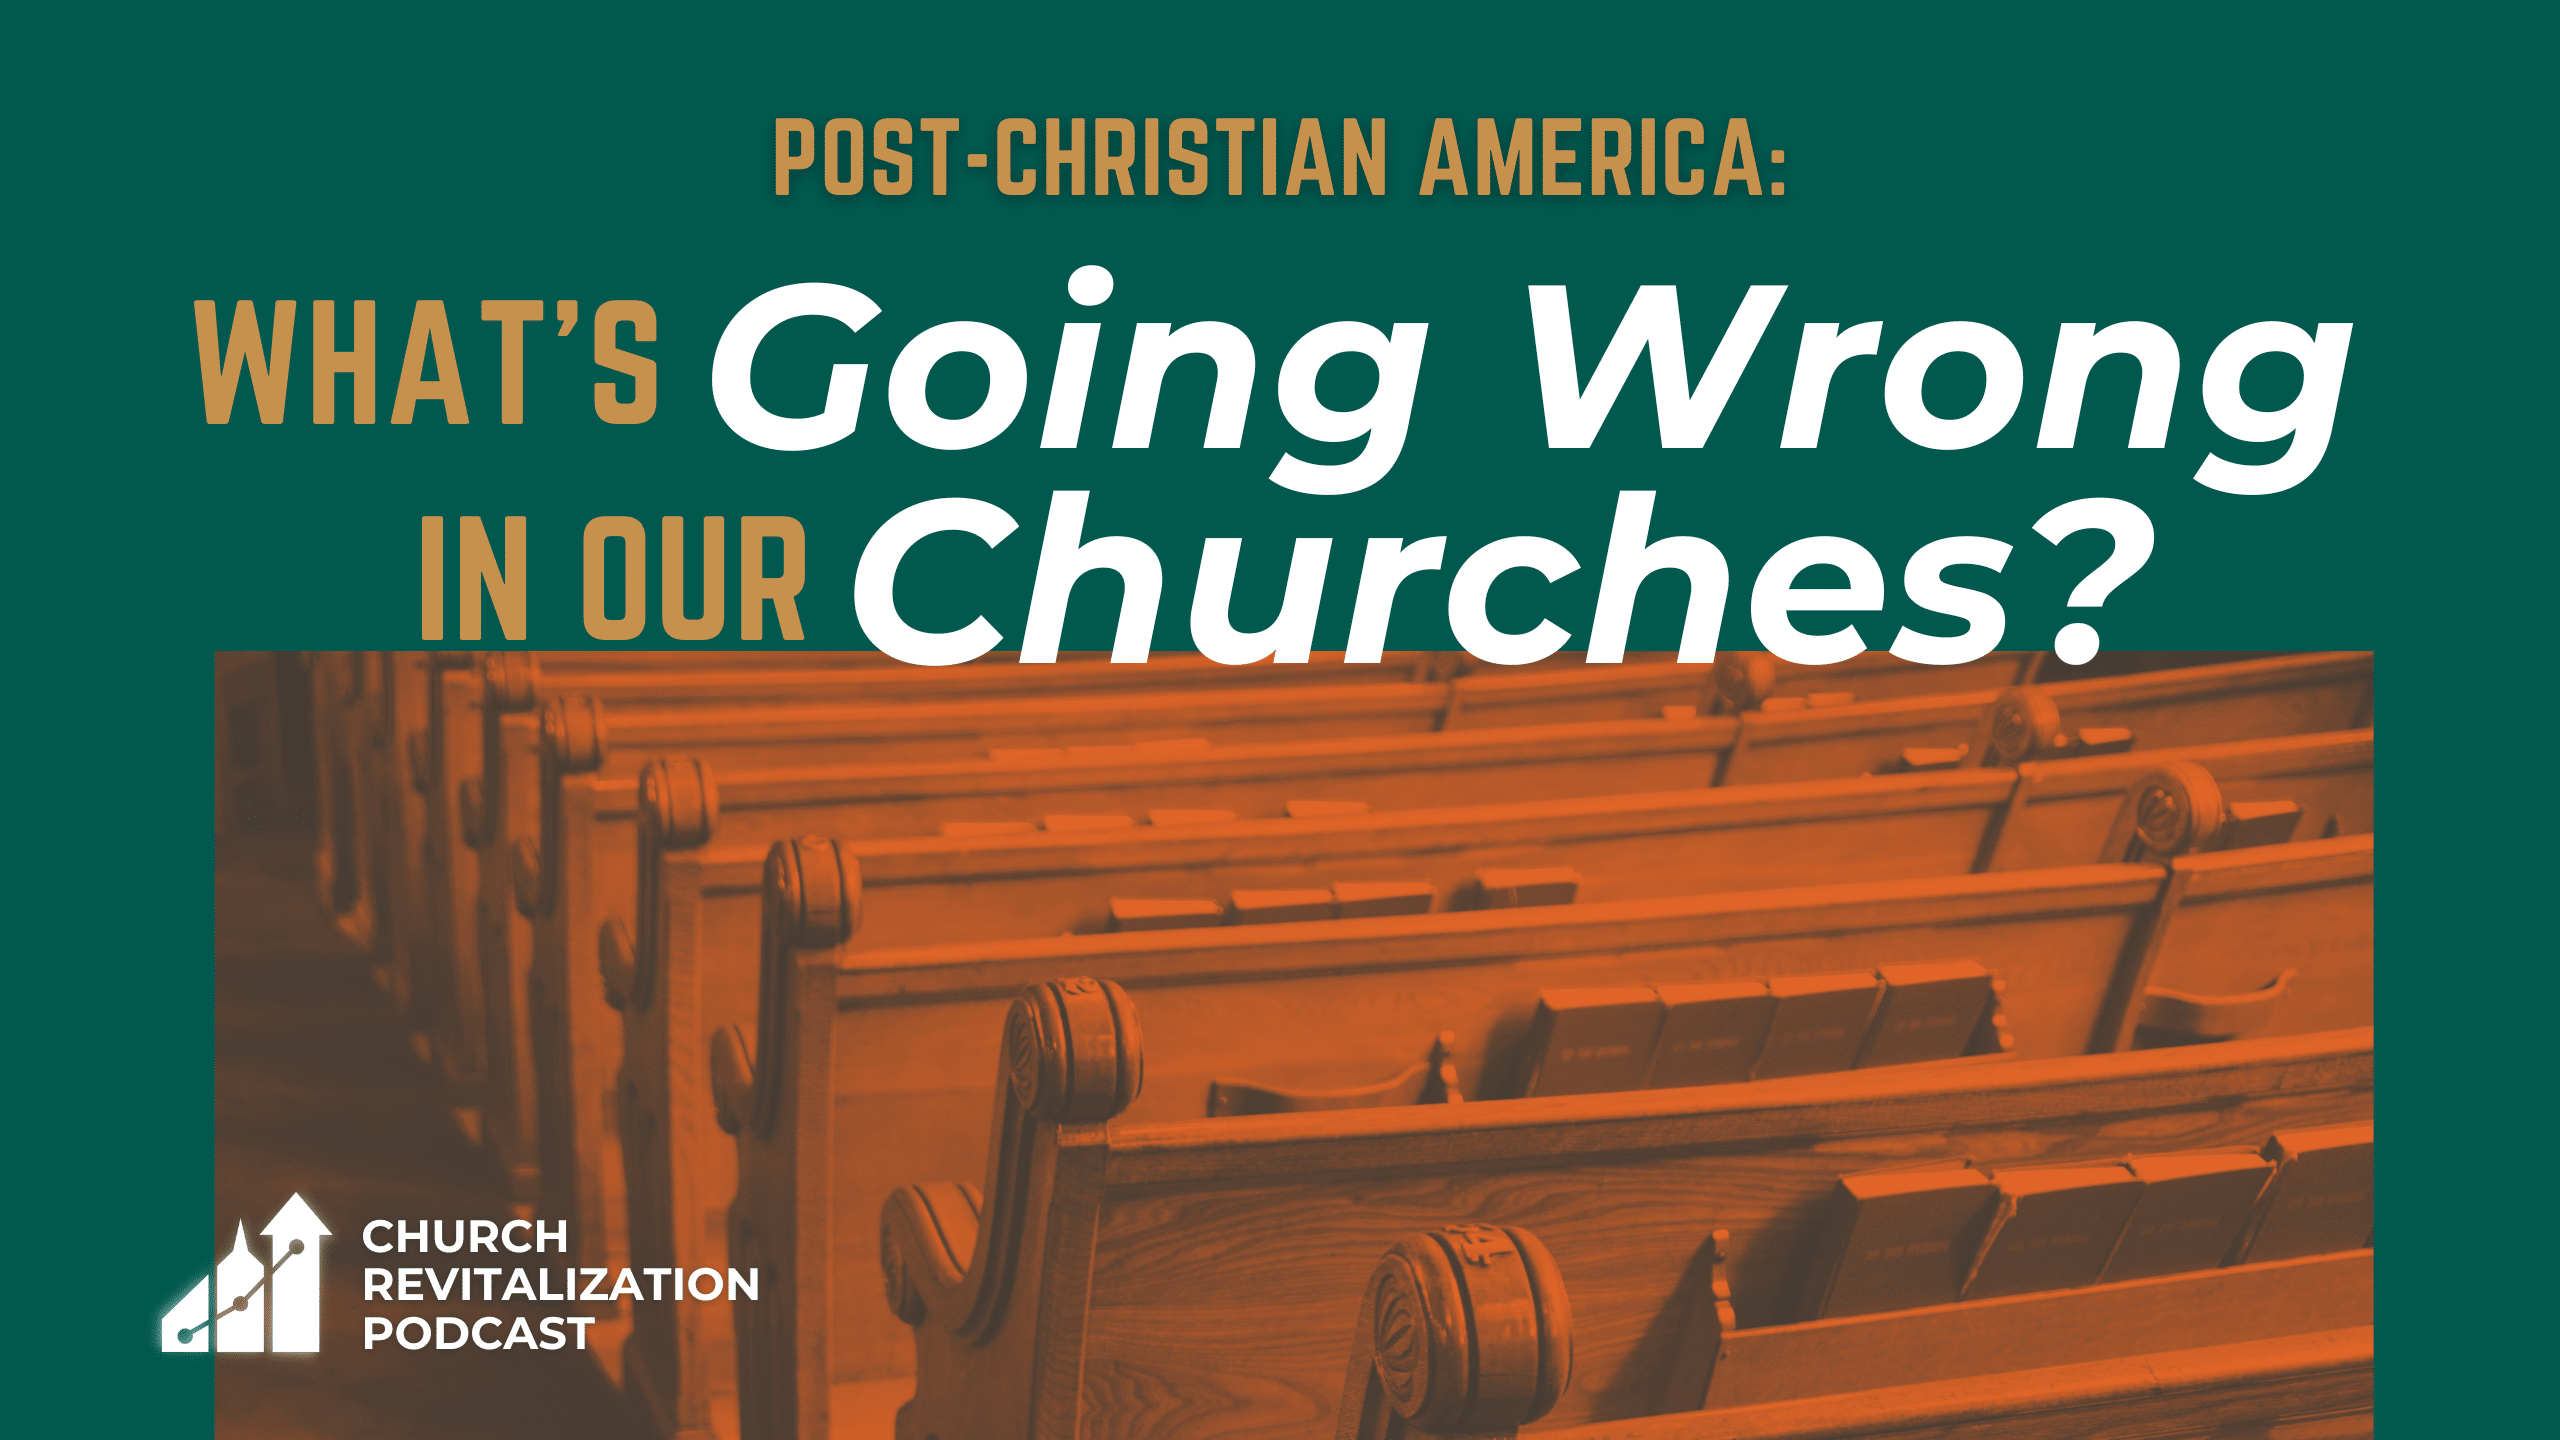 Post-Christian America: What’s Going Wrong In Our Churches?